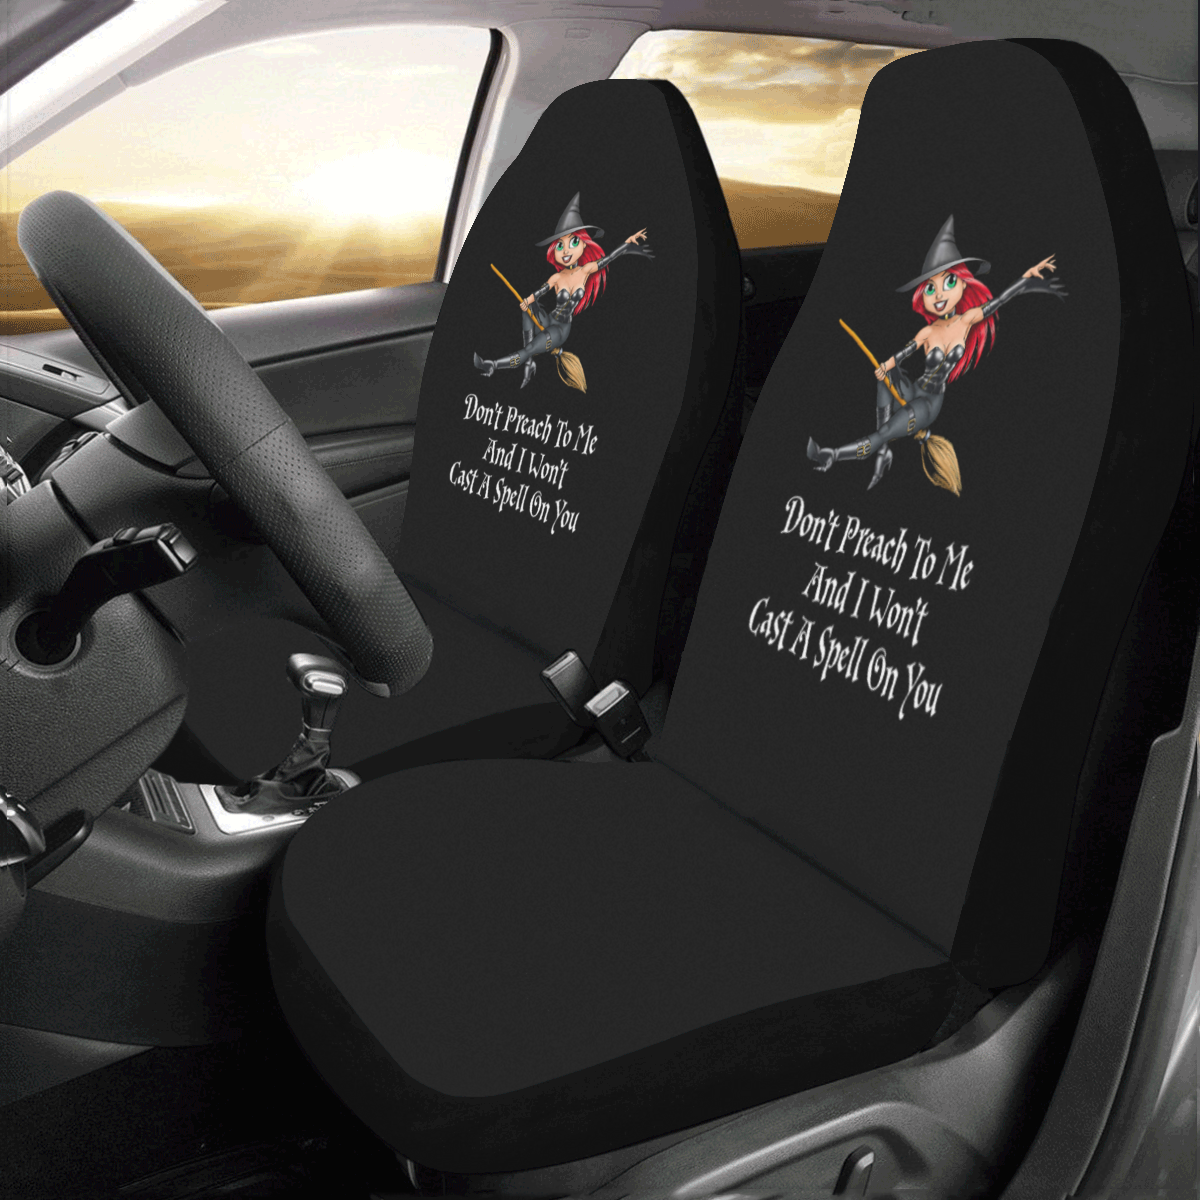 Cast A Spell On You Car Seat Covers (Set of 2)